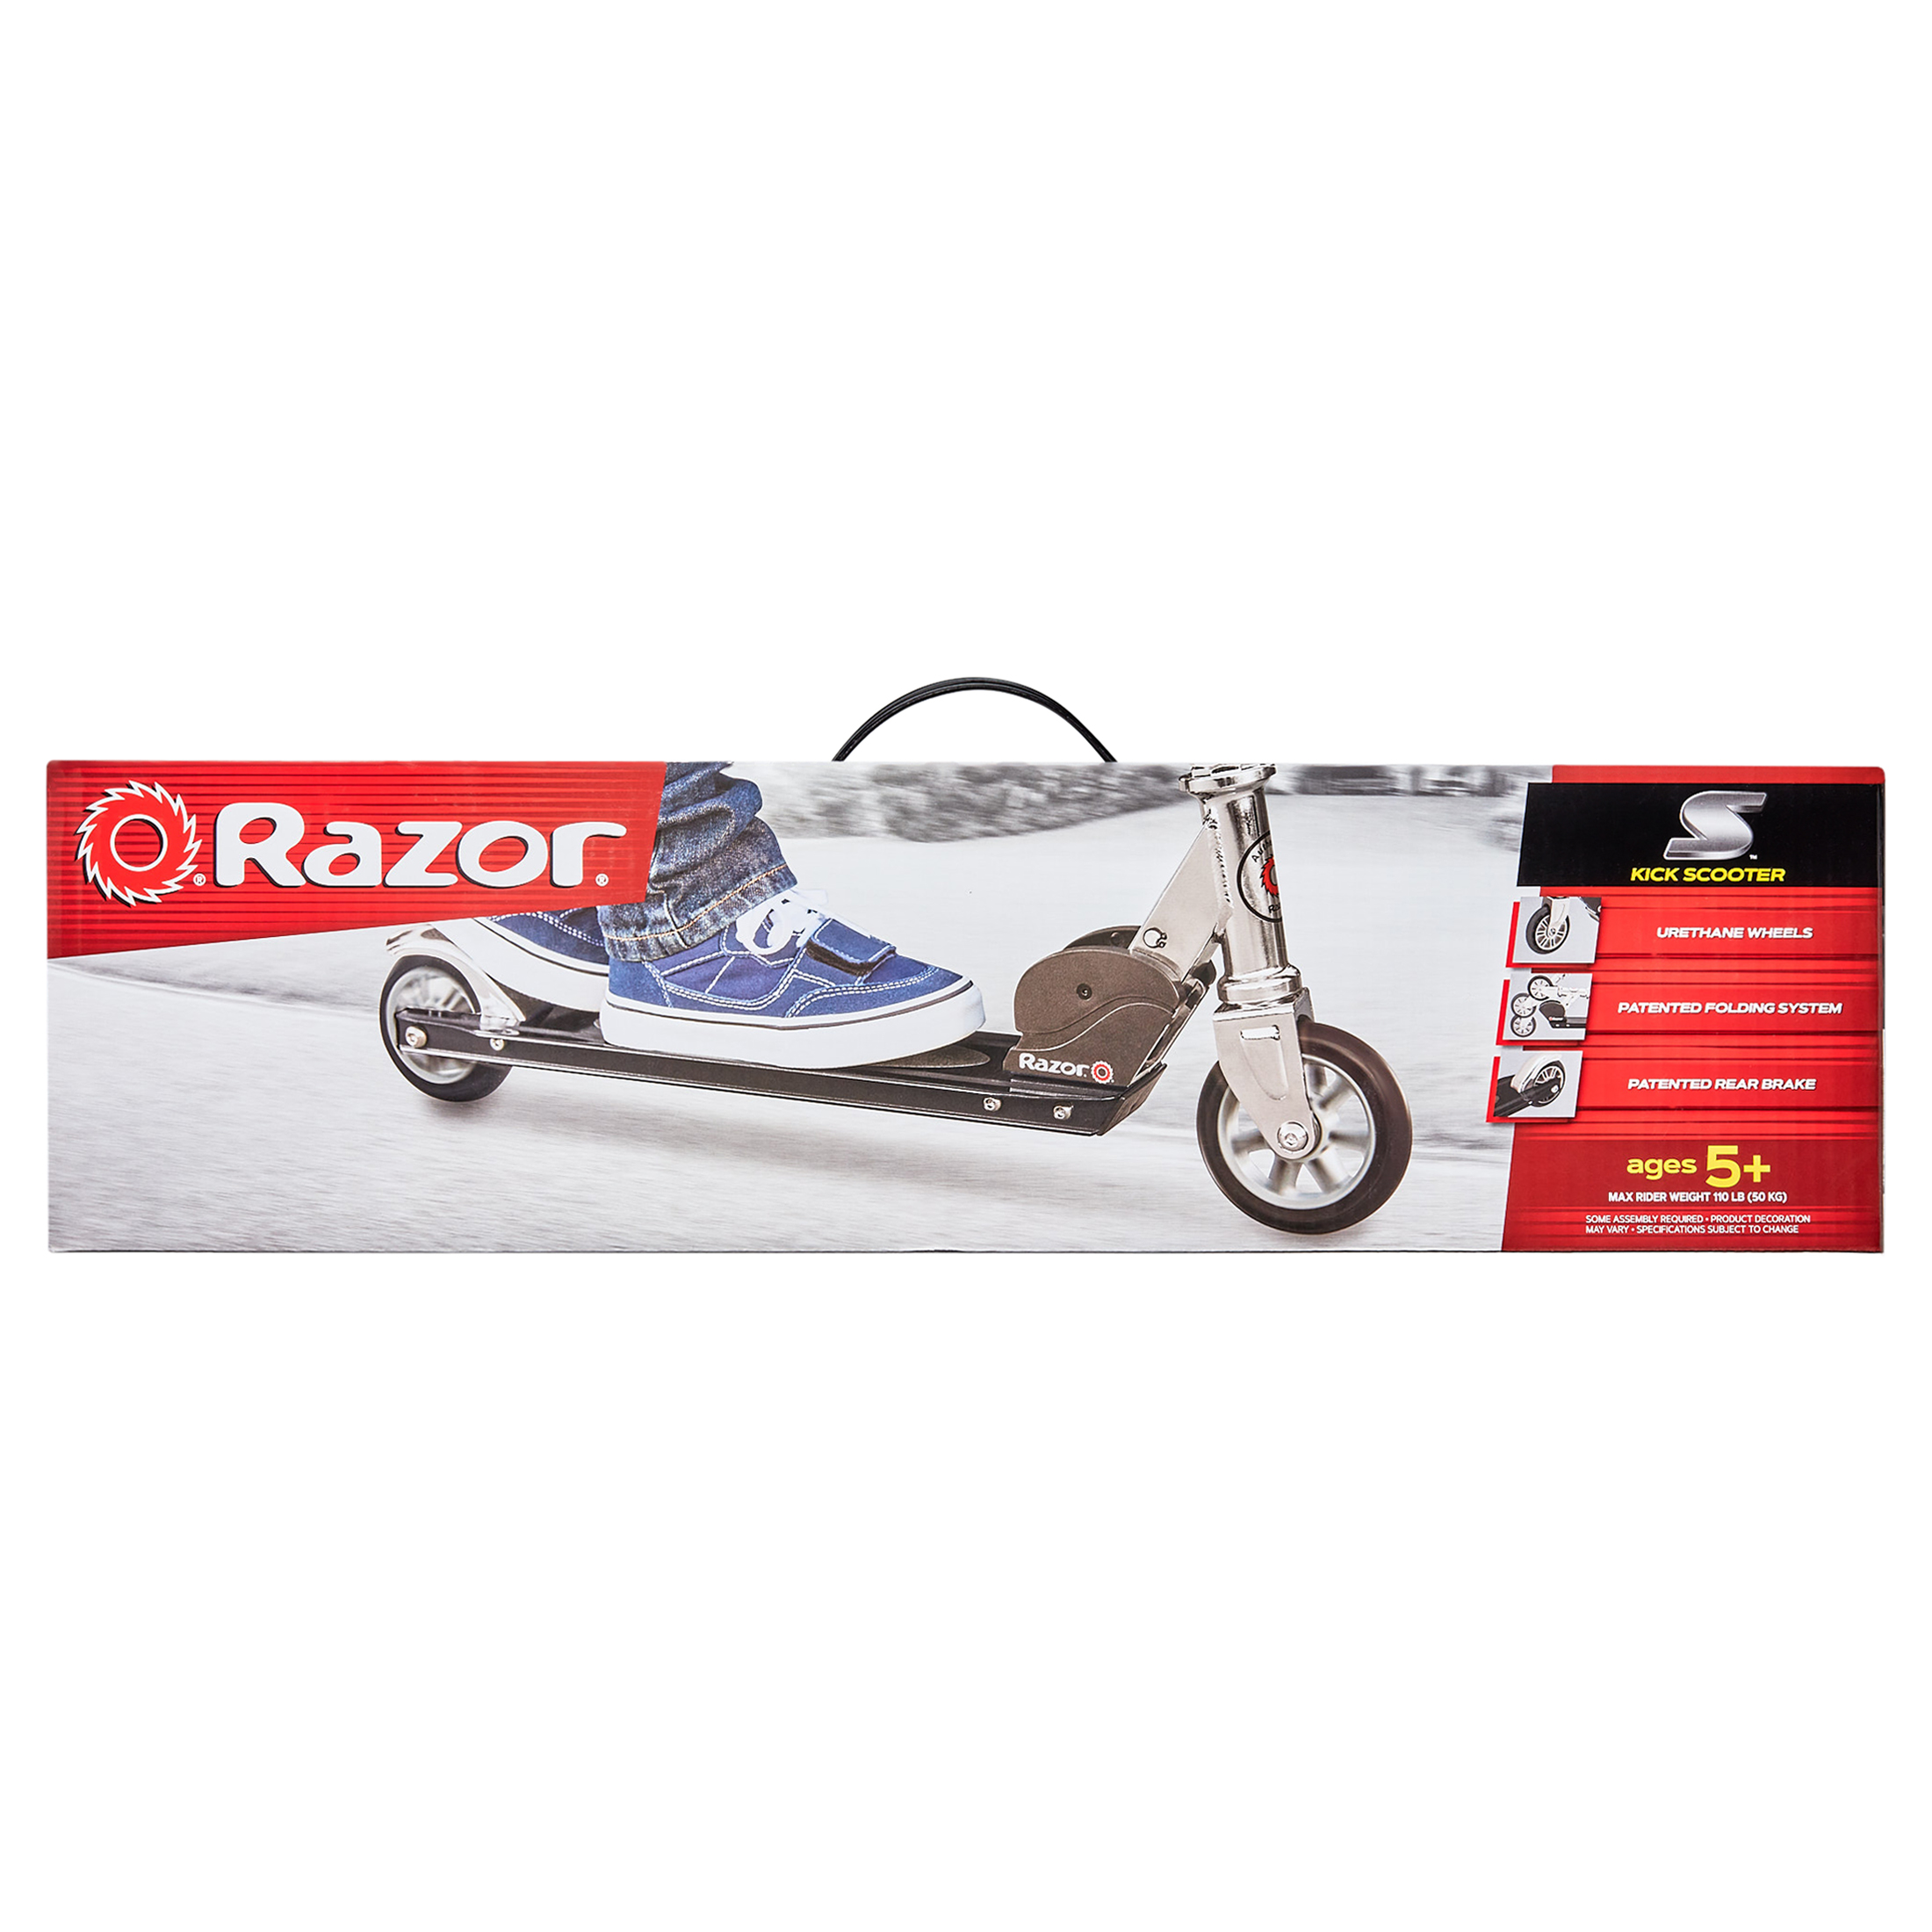 Razor S Folding Kick Scooter - Black, for Kids Ages 5+ and up to 110 lb - image 1 of 9